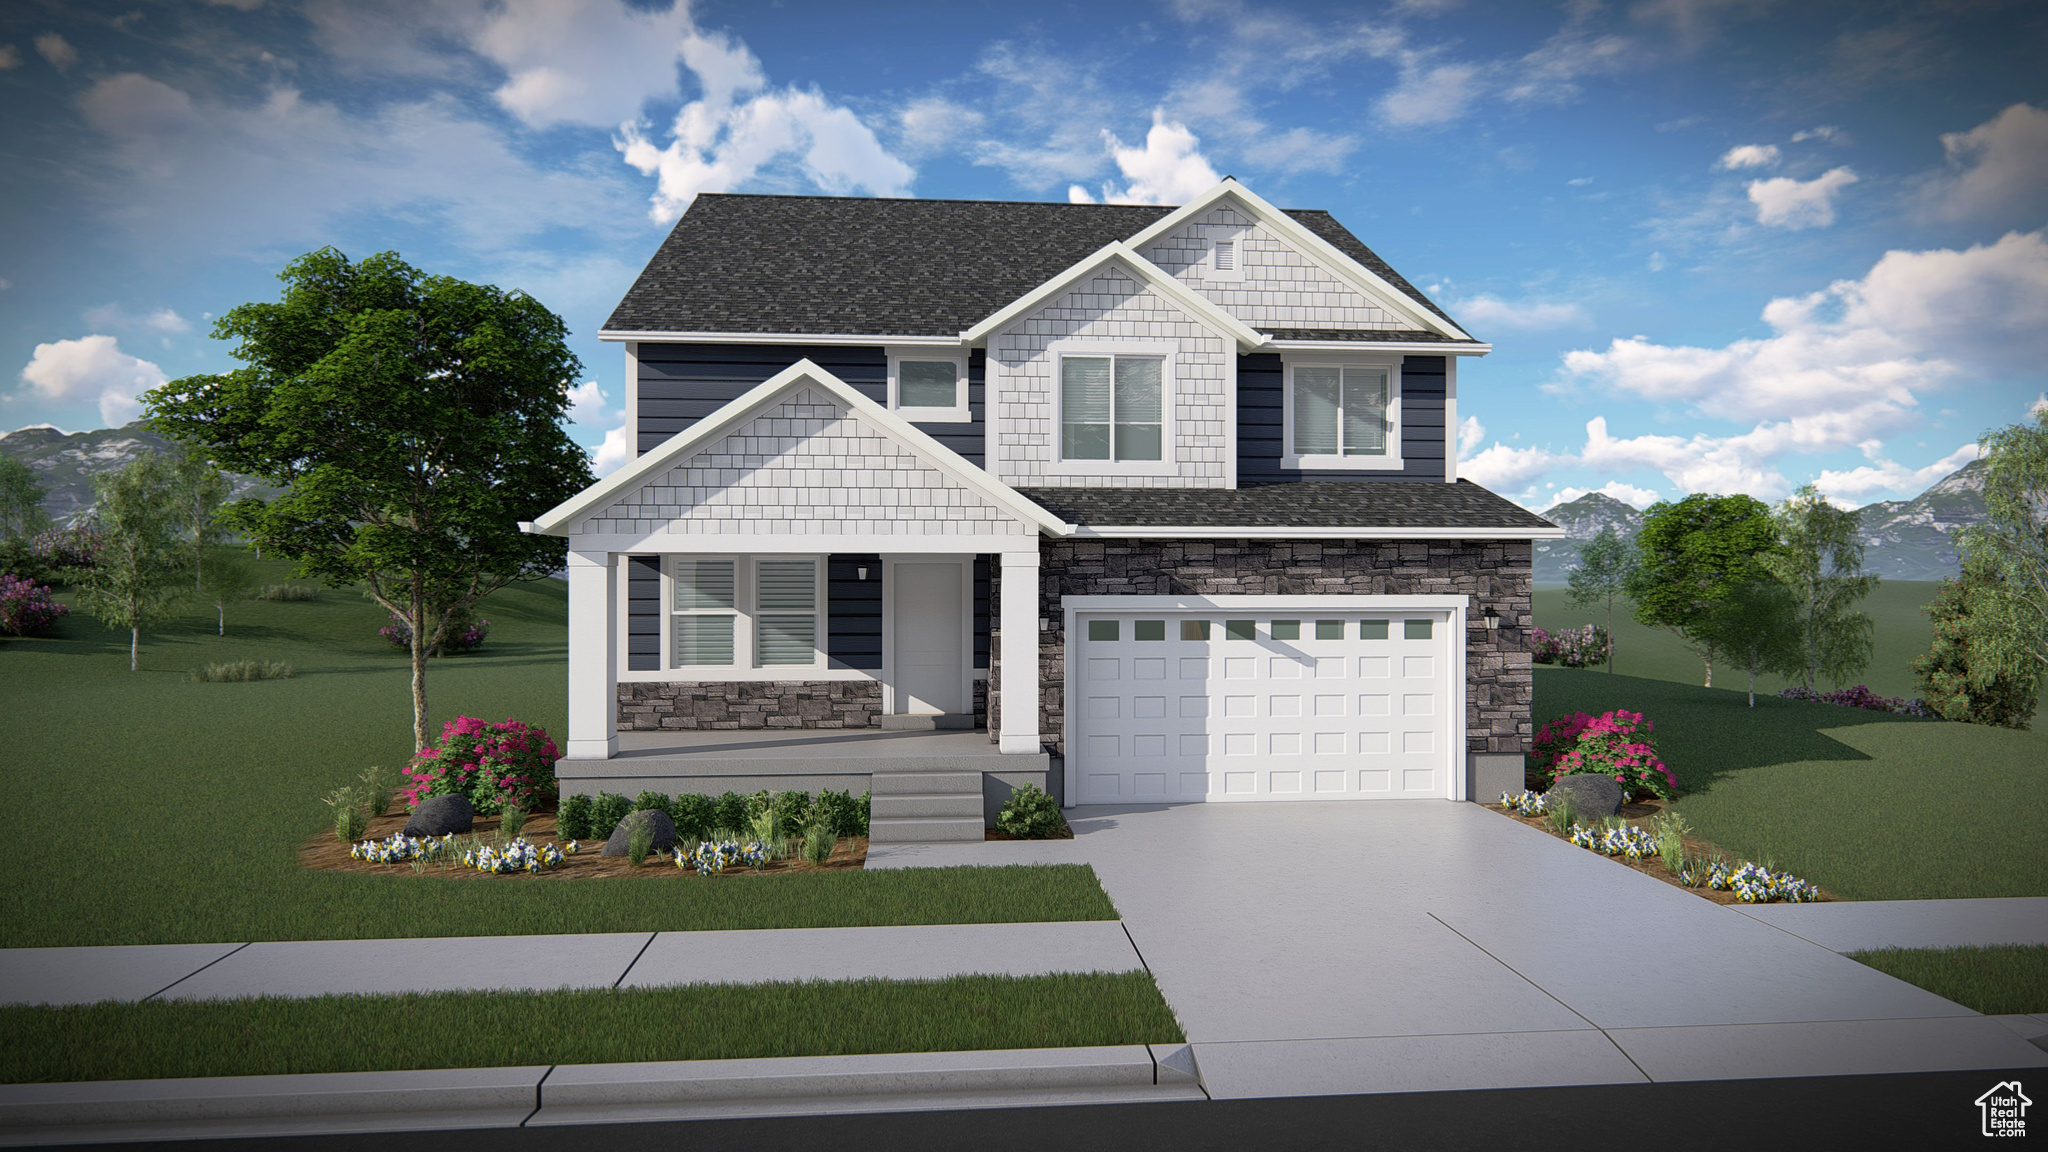 Craftsman inspired home with a front lawn and a garage